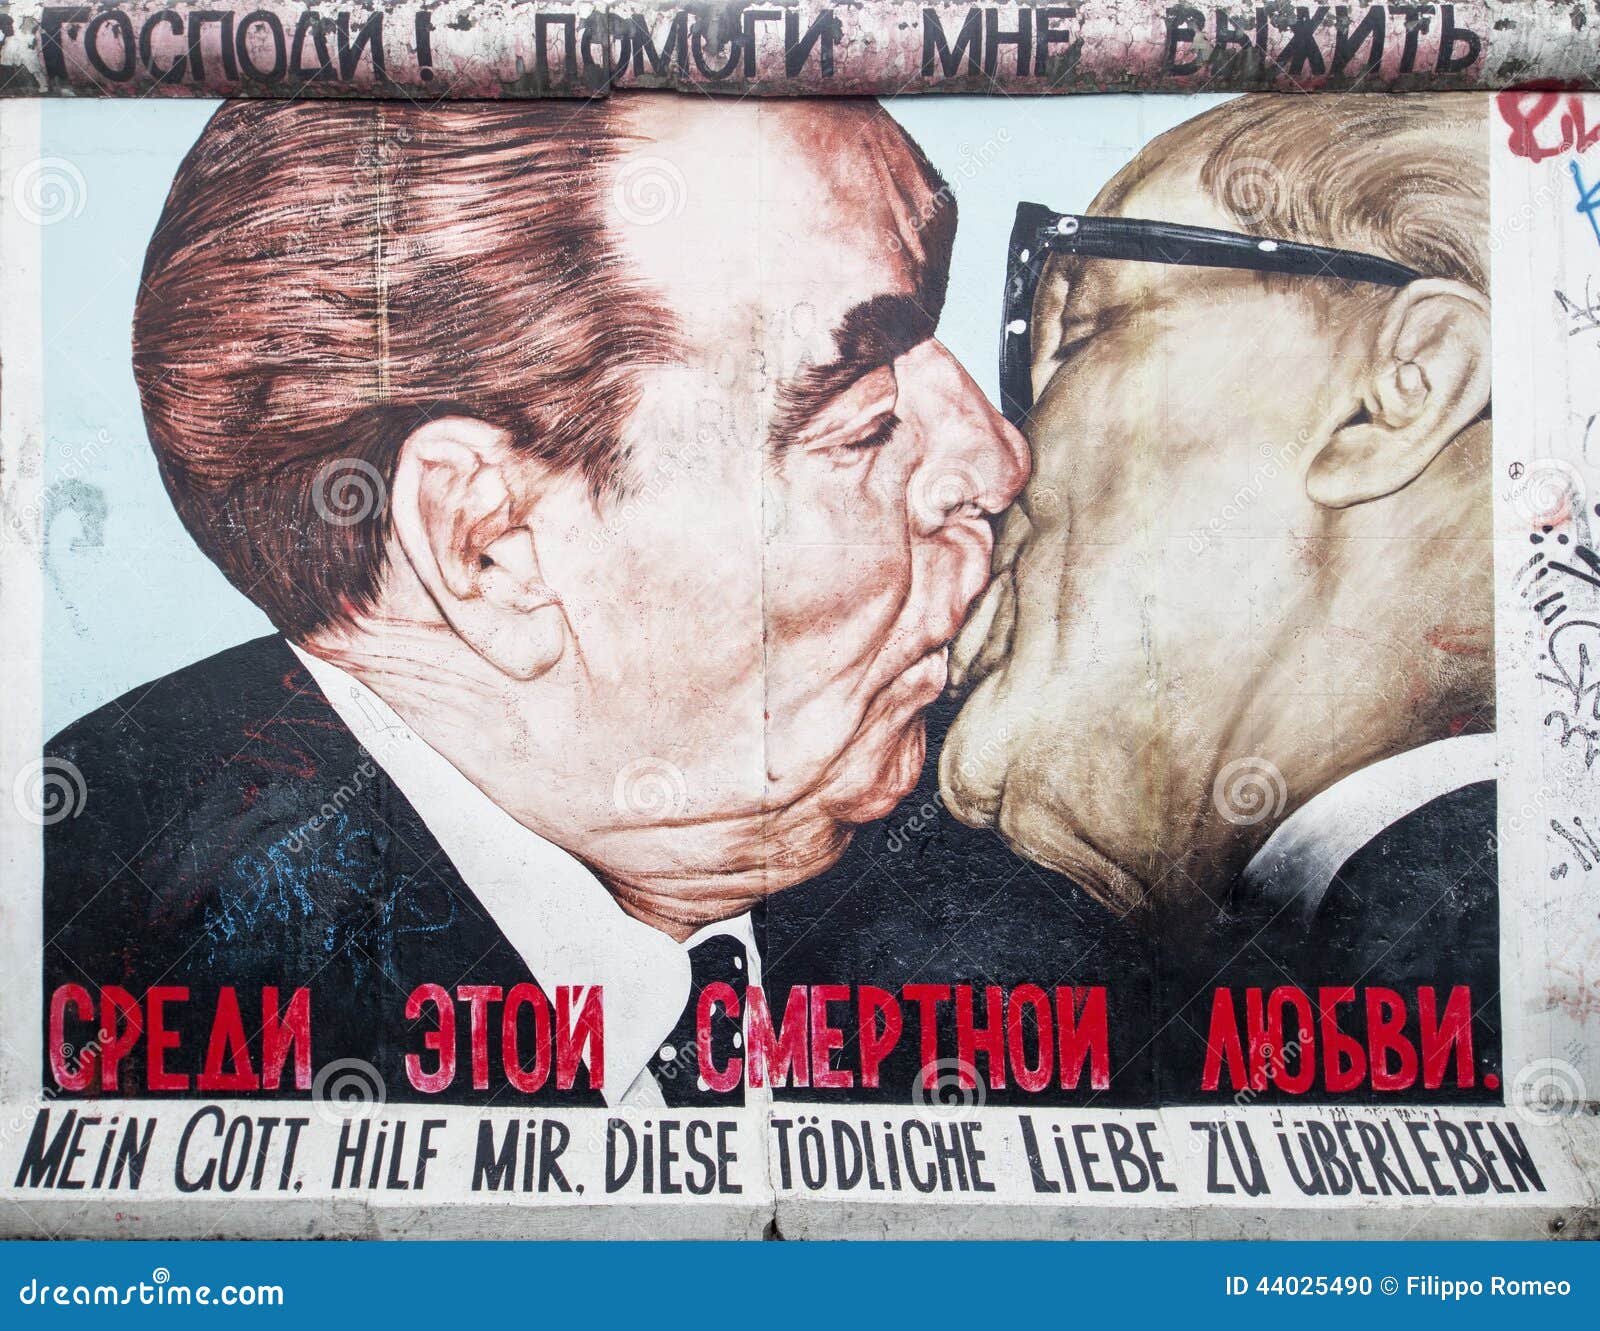 All 102+ Images what nationality are the two politicians depicted kissing on the former berlin wall? Excellent